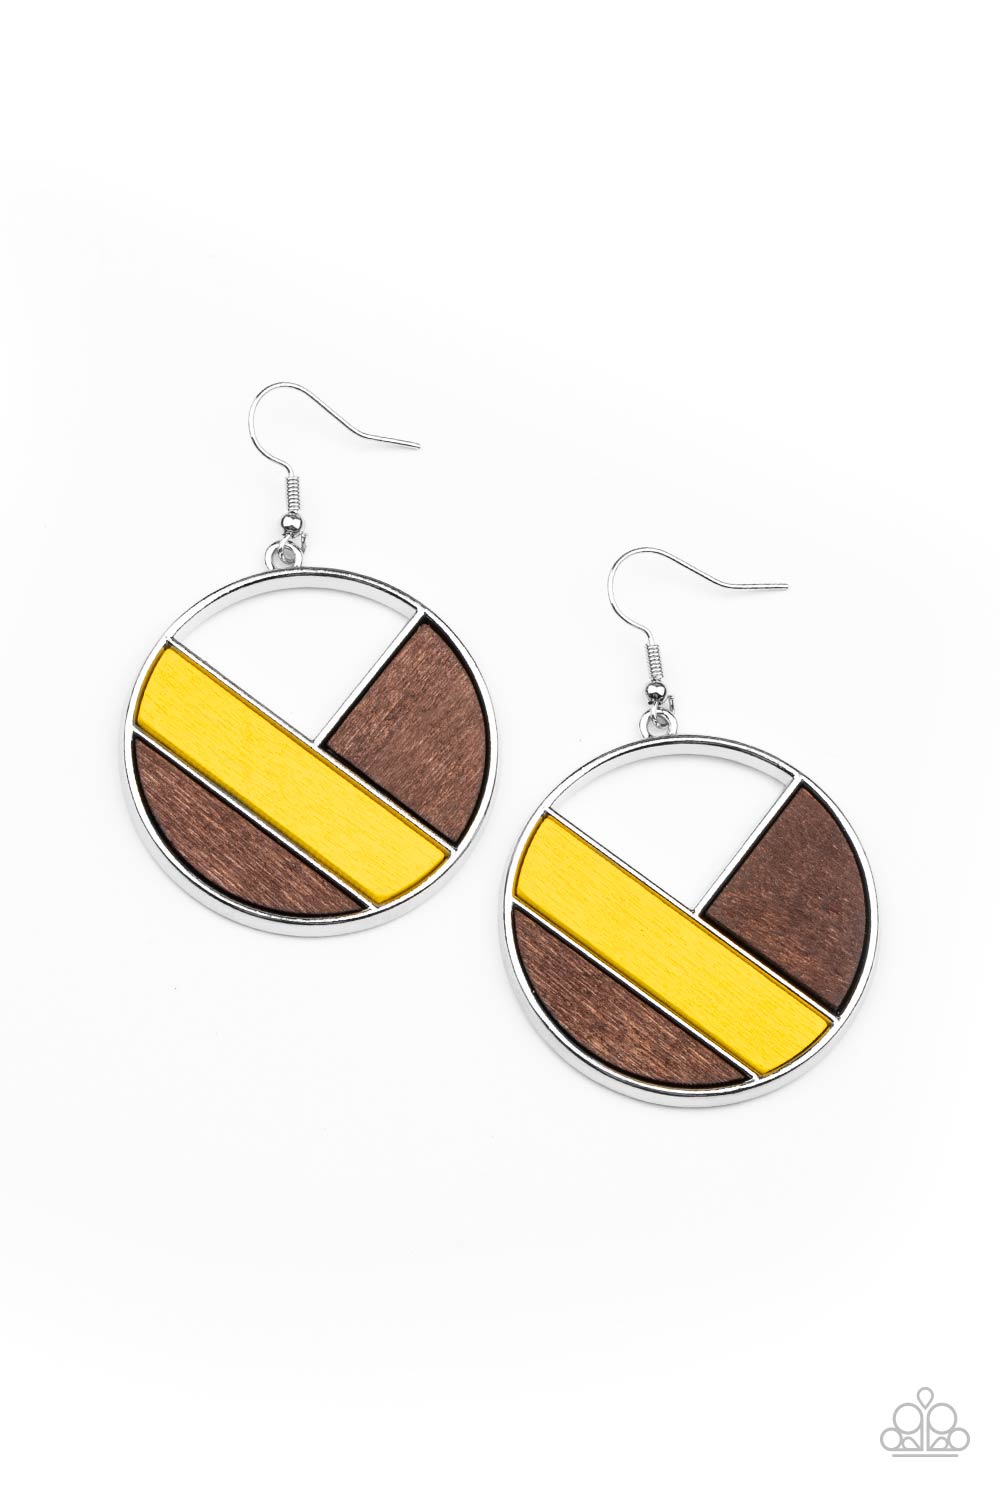 Earring - Dont Be MODest - Yellow